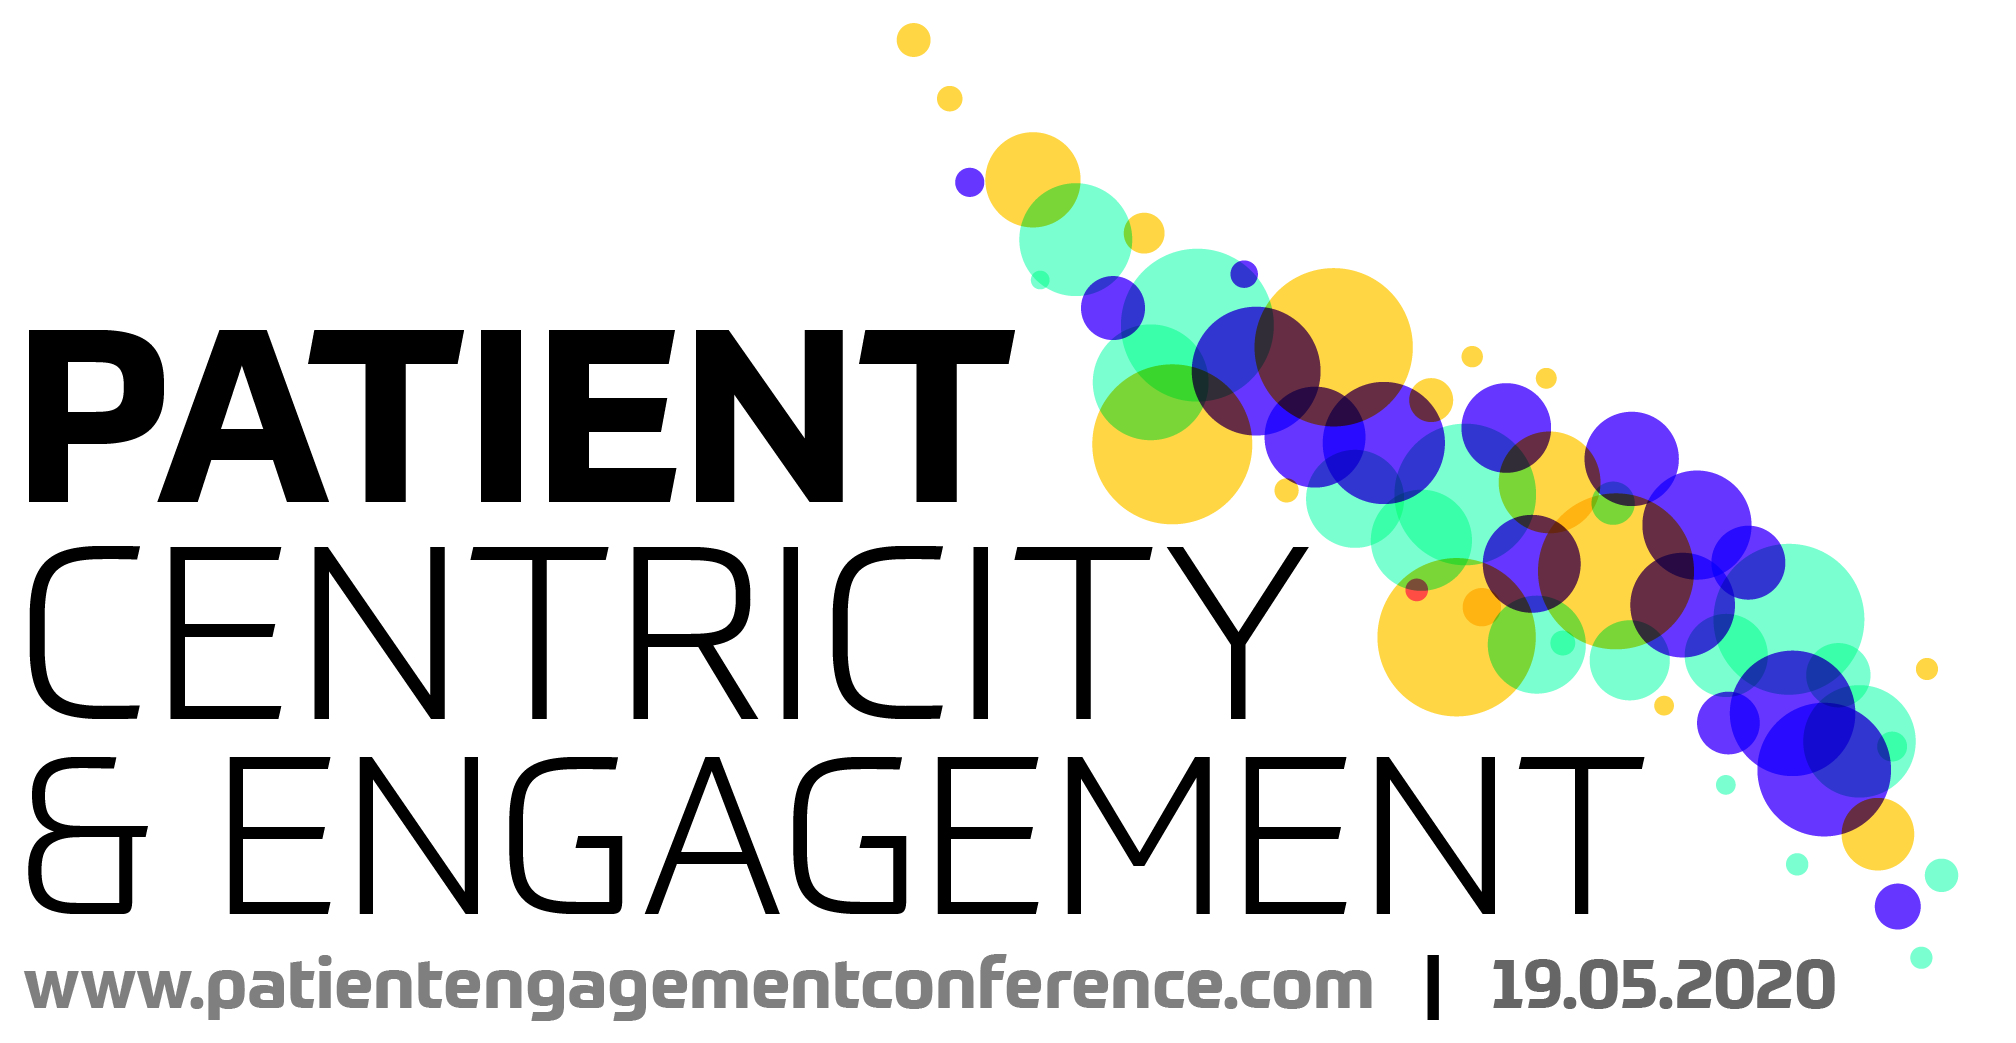 The Patient Centricity & Engagement Conference